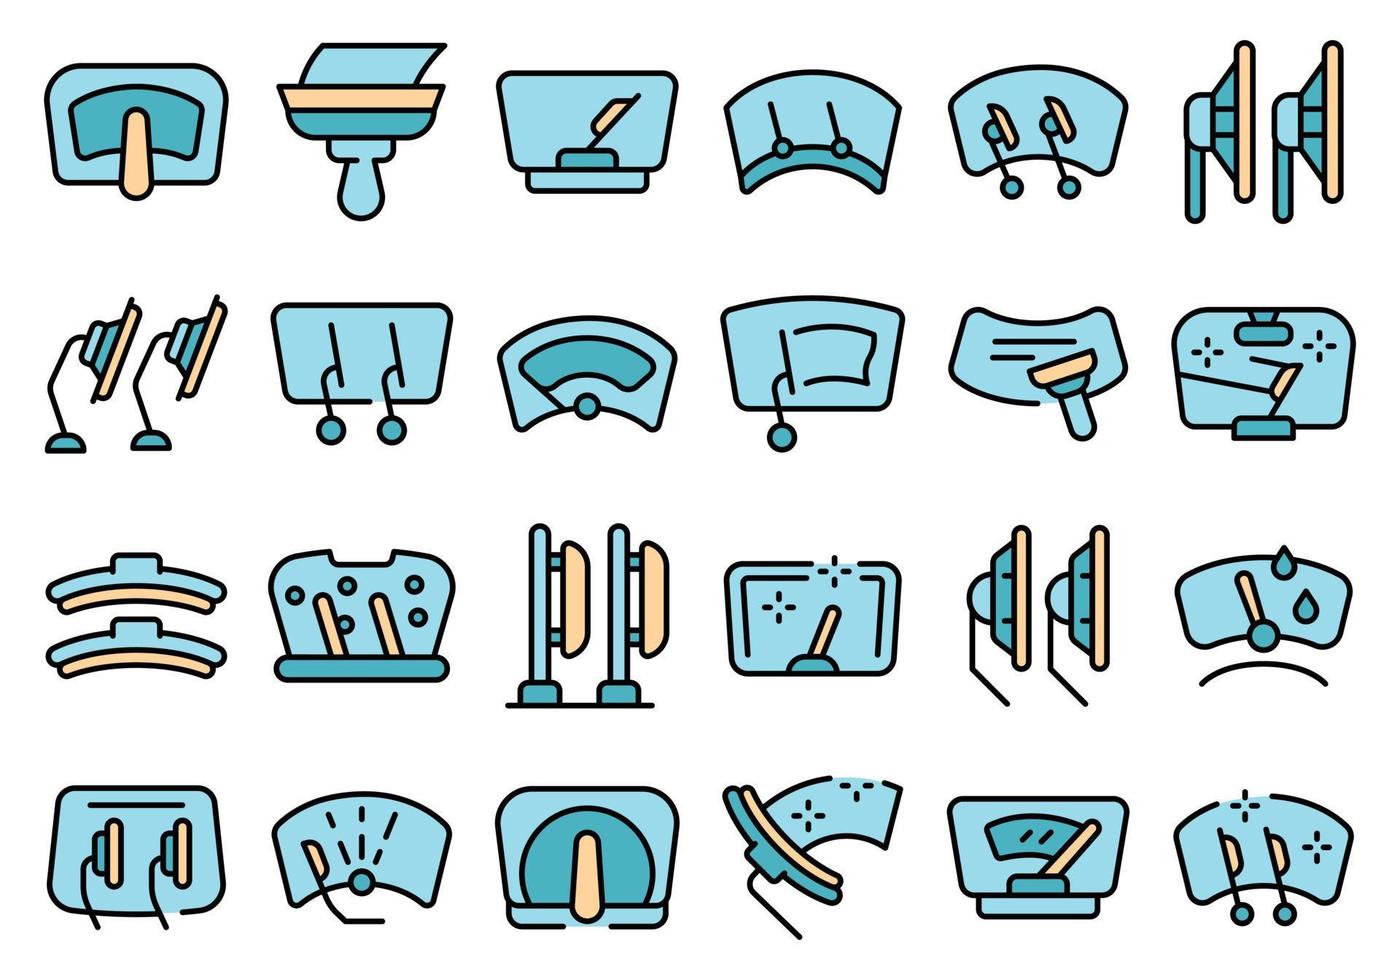 Windshield wiper icons set vector flat